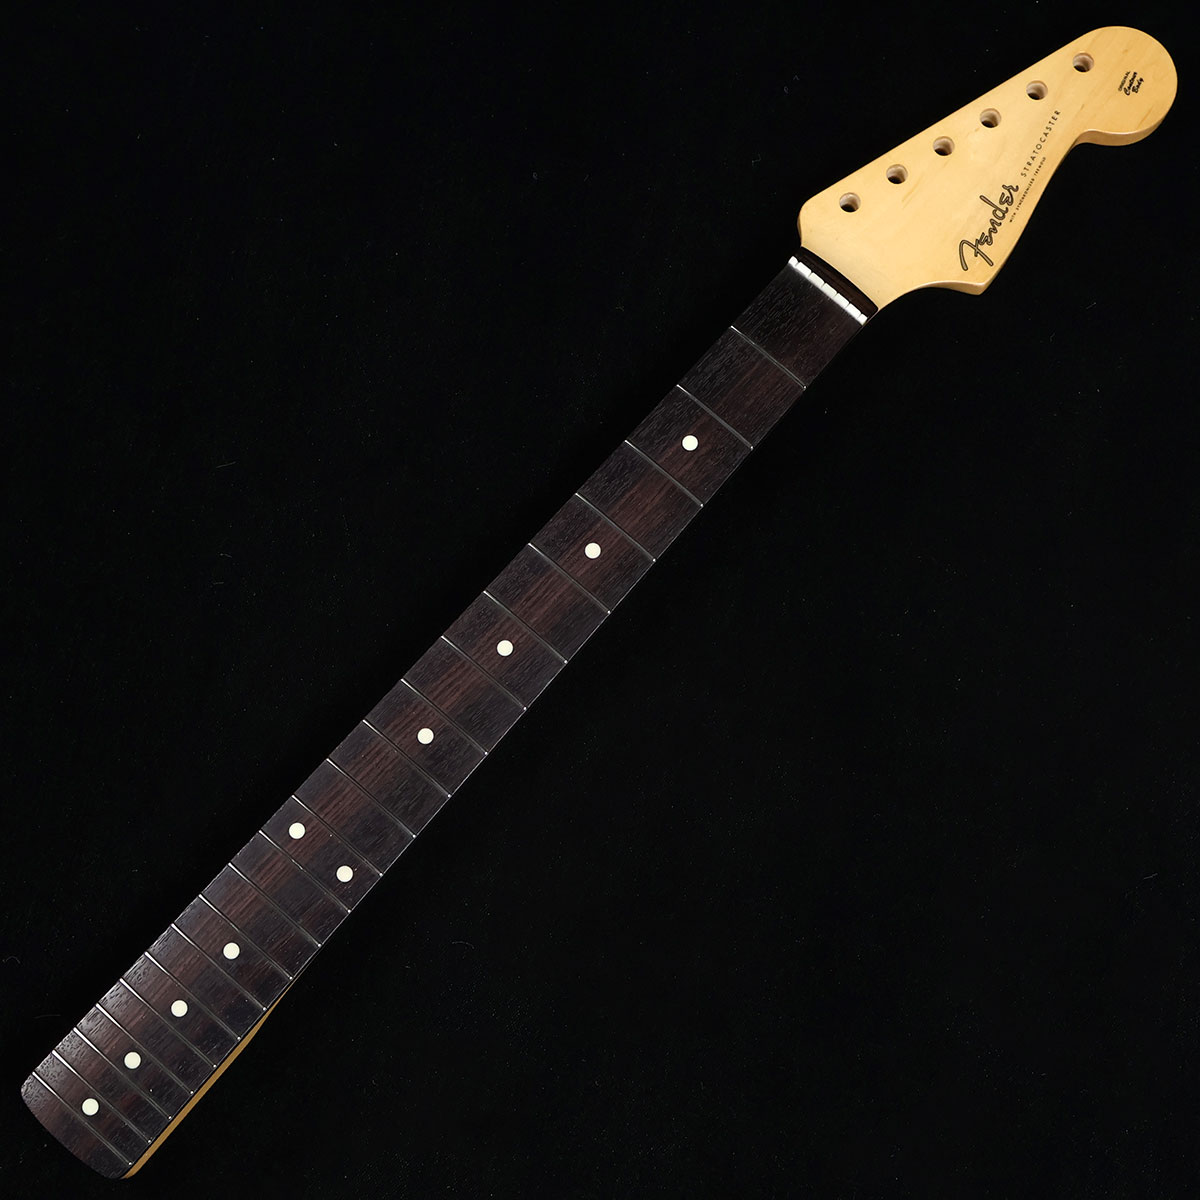 Fender Traditional II 60s Stratocaster Neck リプレイスメントネック